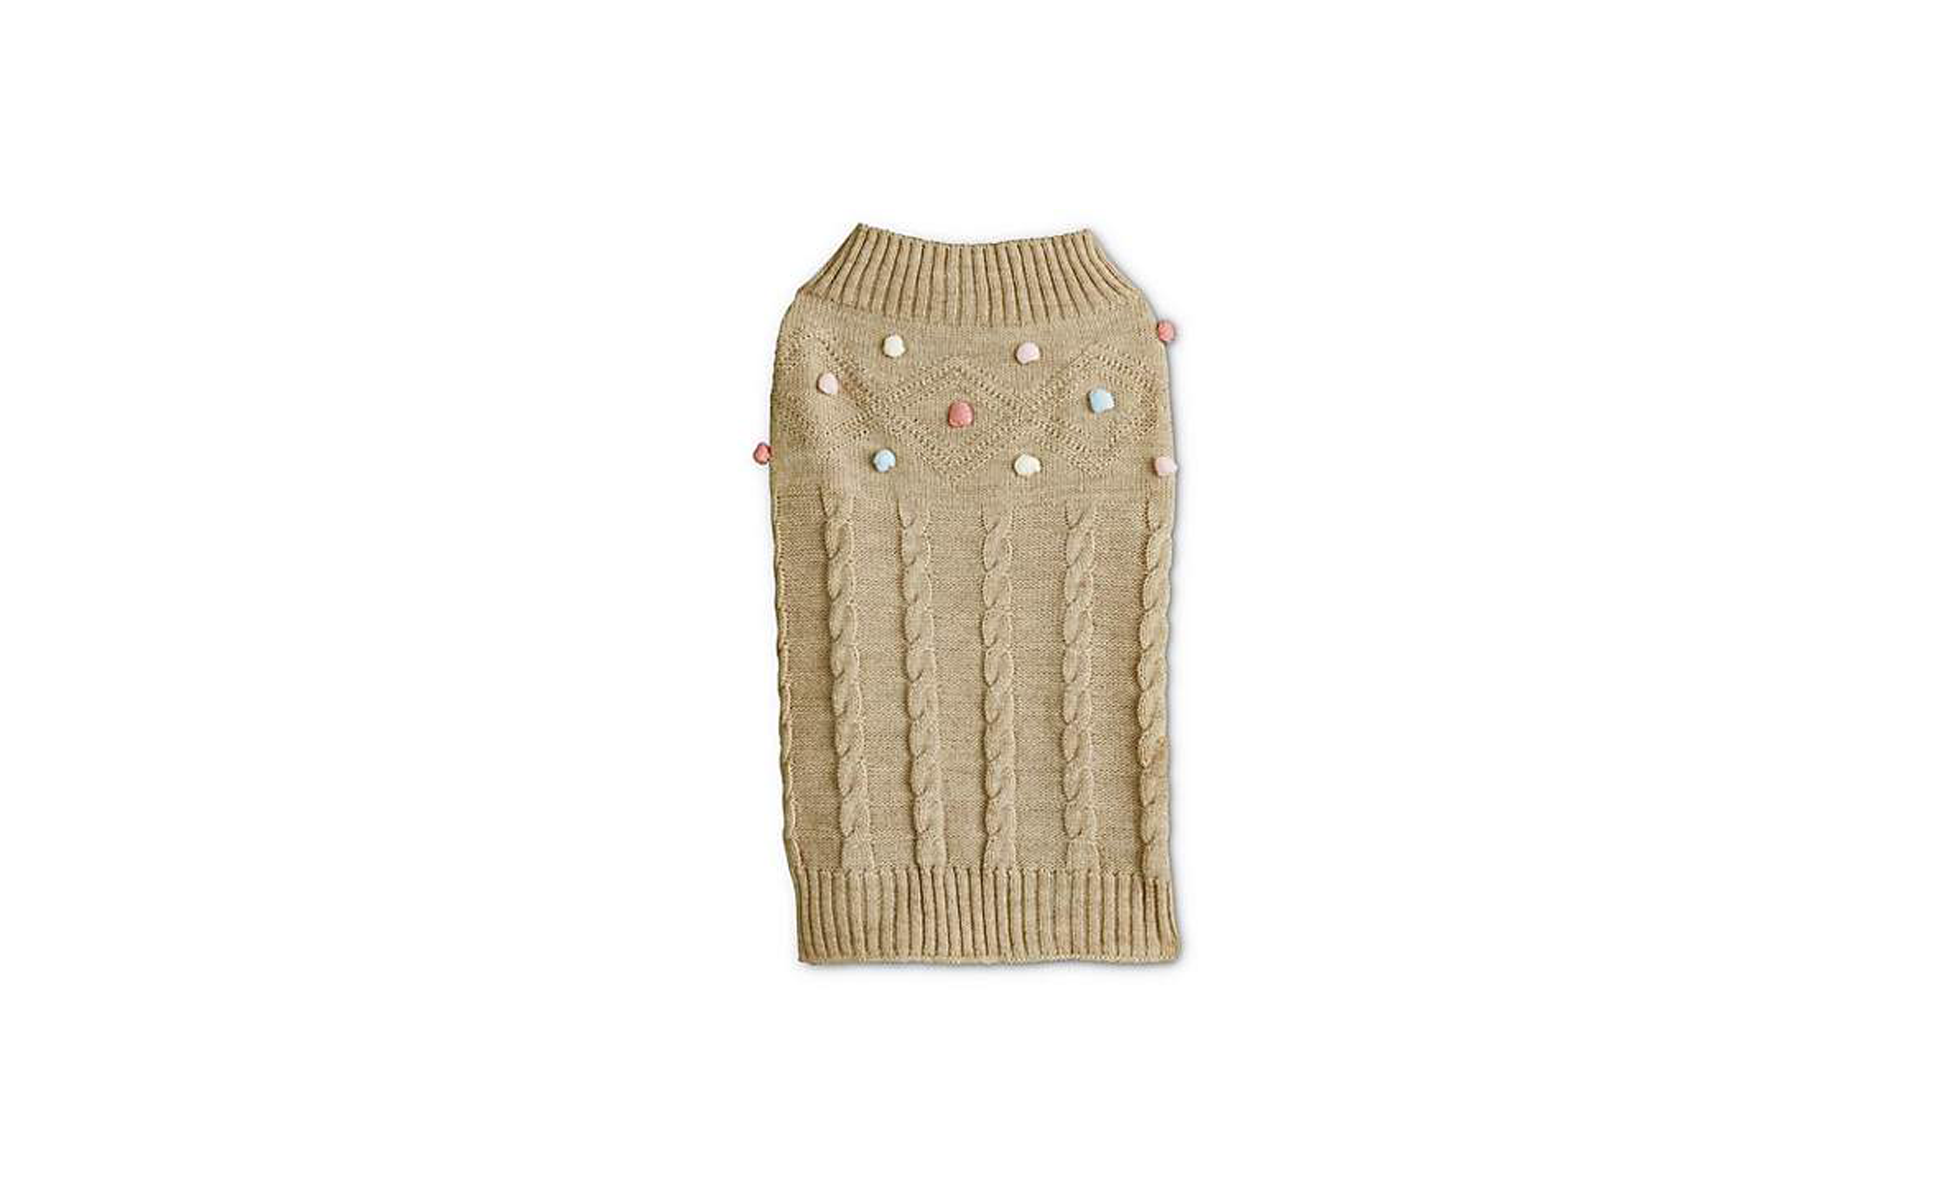 Bond and Co. Oatmeal Knit Sweater with Confetti Poms